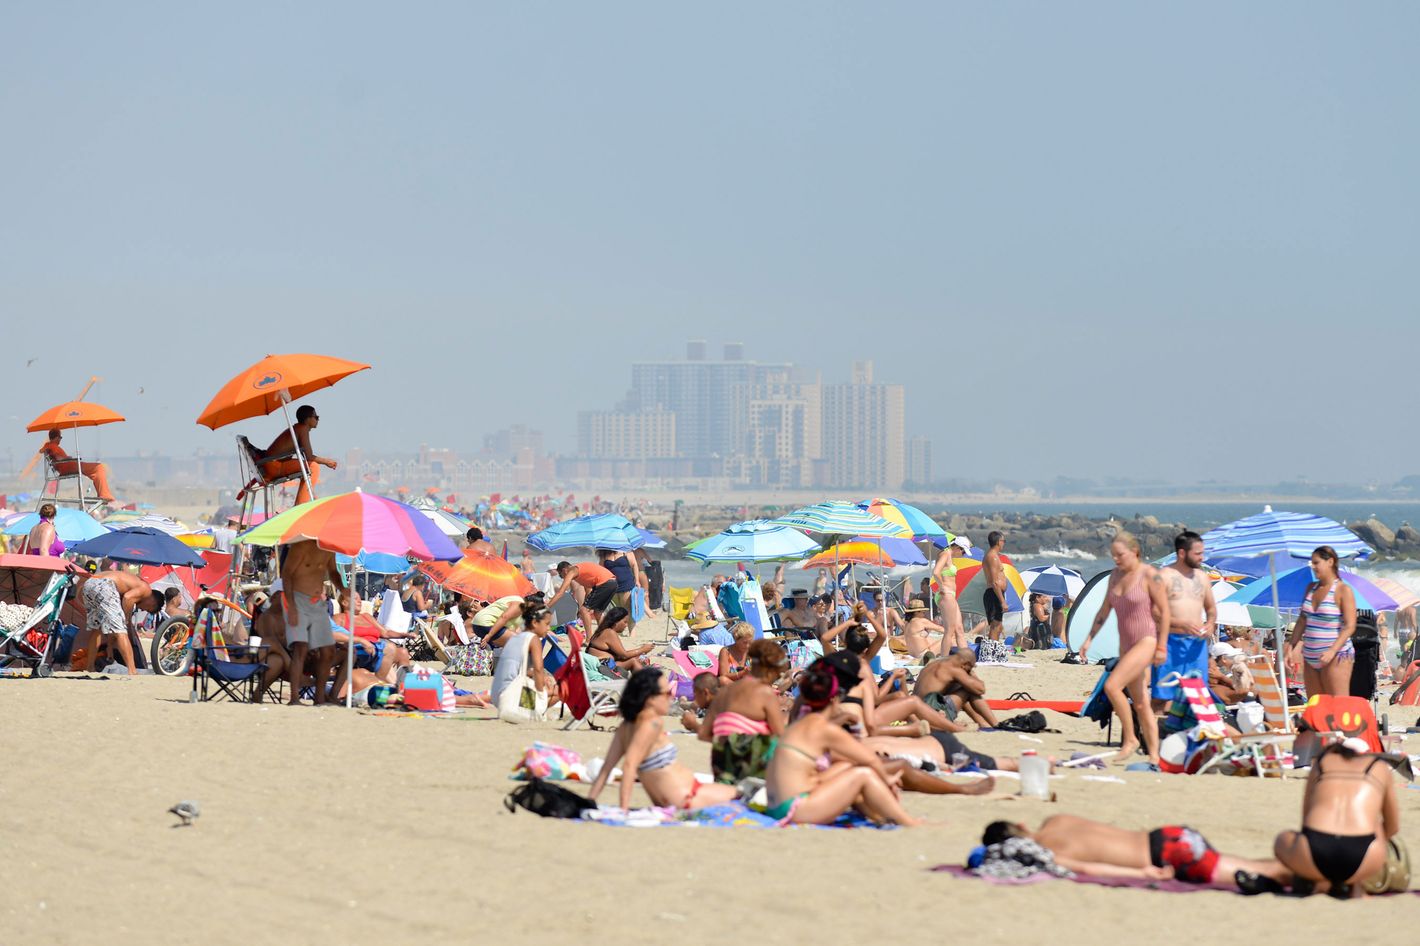 An Exhaustive Guide to the Rockaways